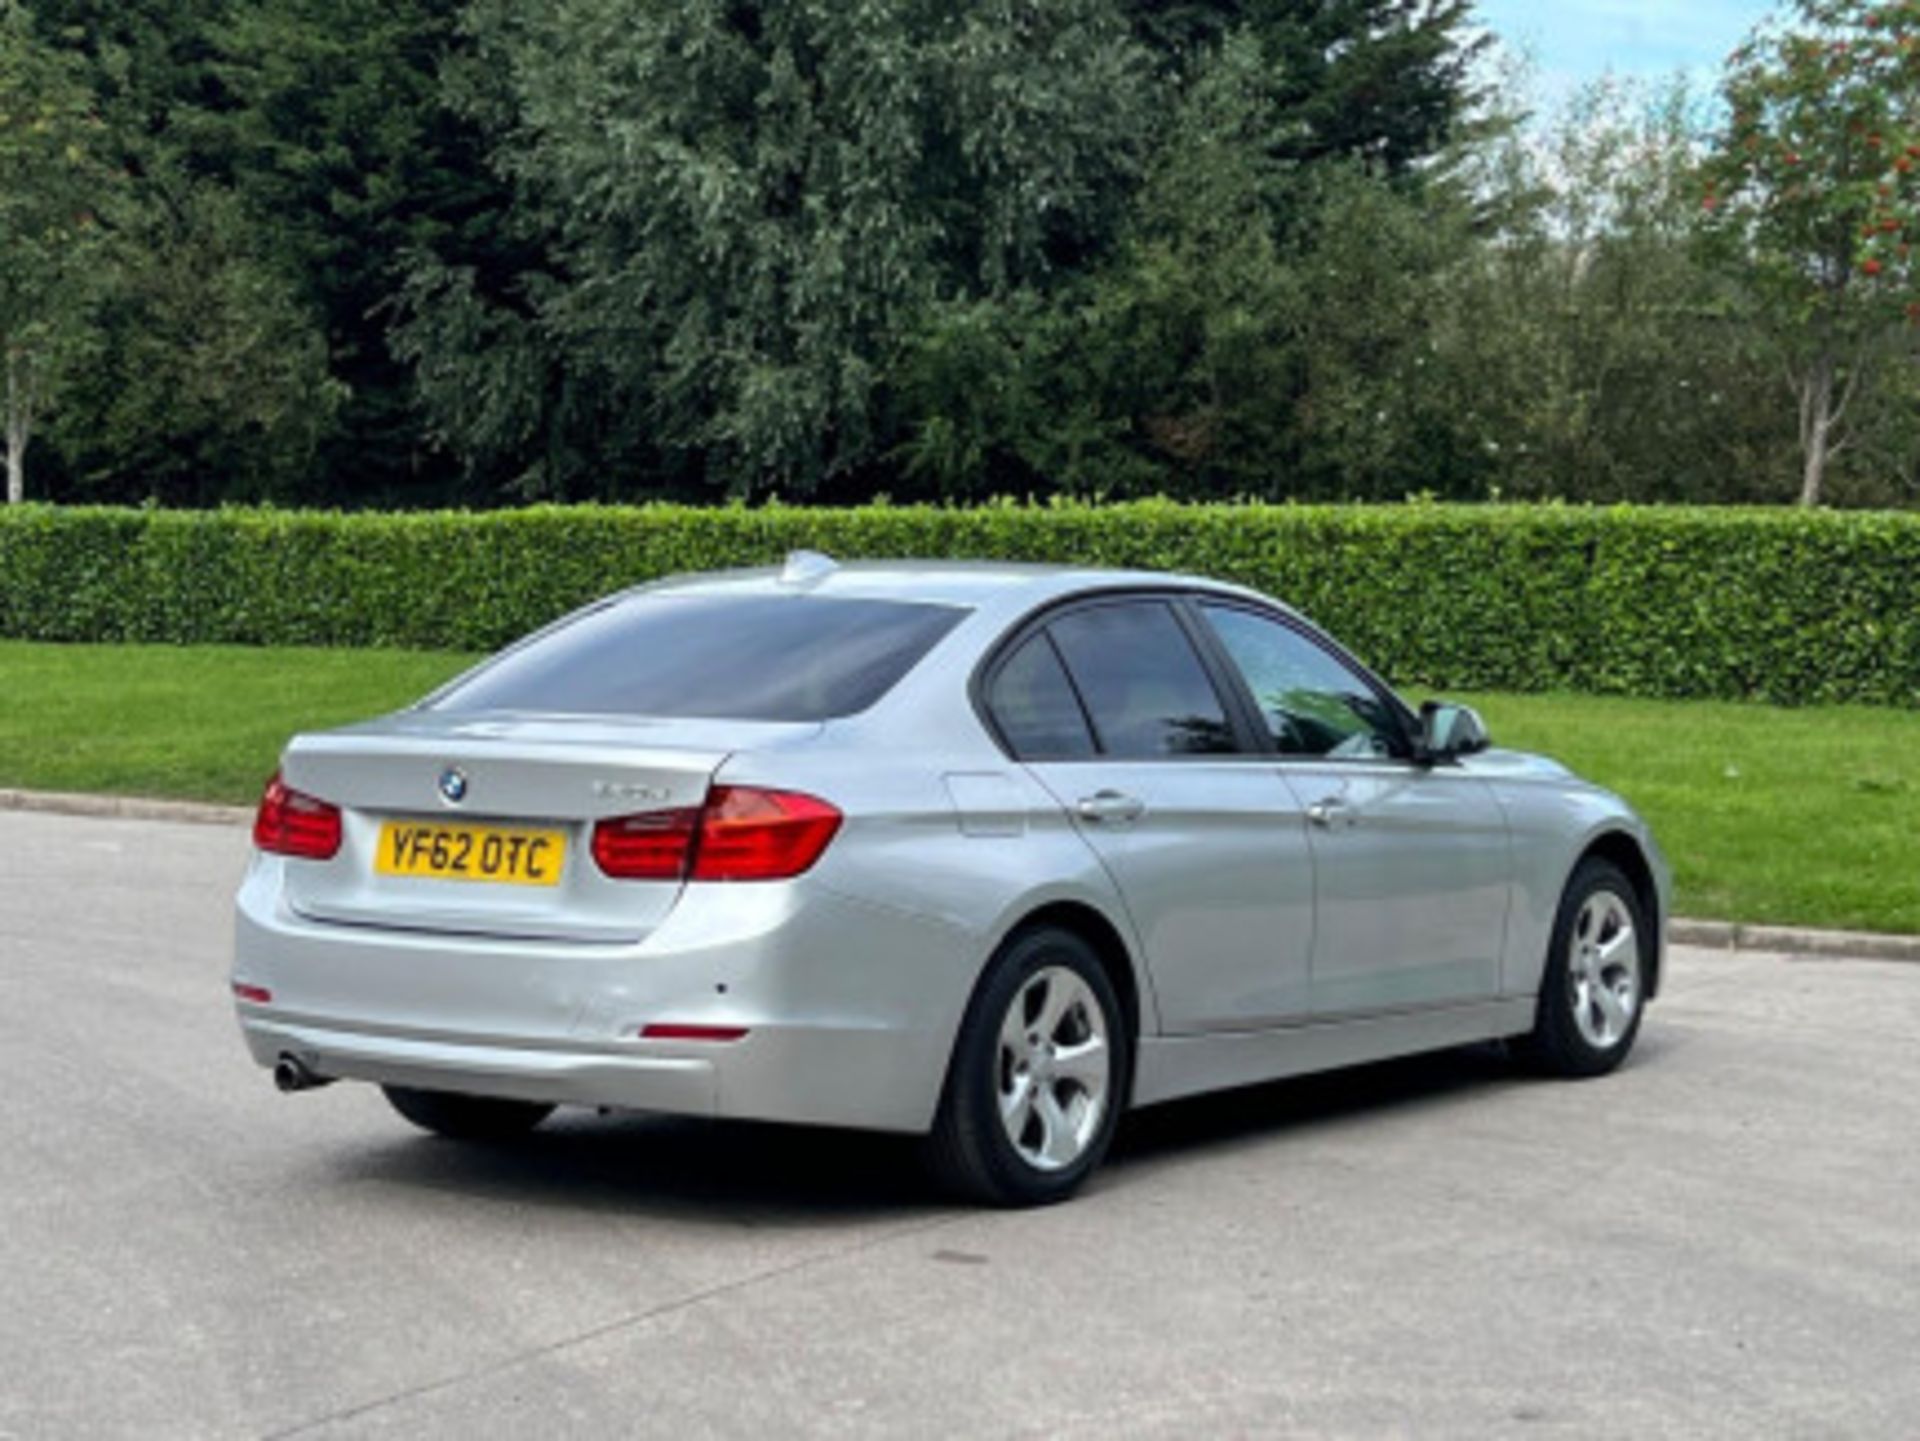 BMW 3 SERIES 2.0 DIESEL ED START STOP - A WELL-MAINTAINED GEM >>--NO VAT ON HAMMER--<< - Image 128 of 229